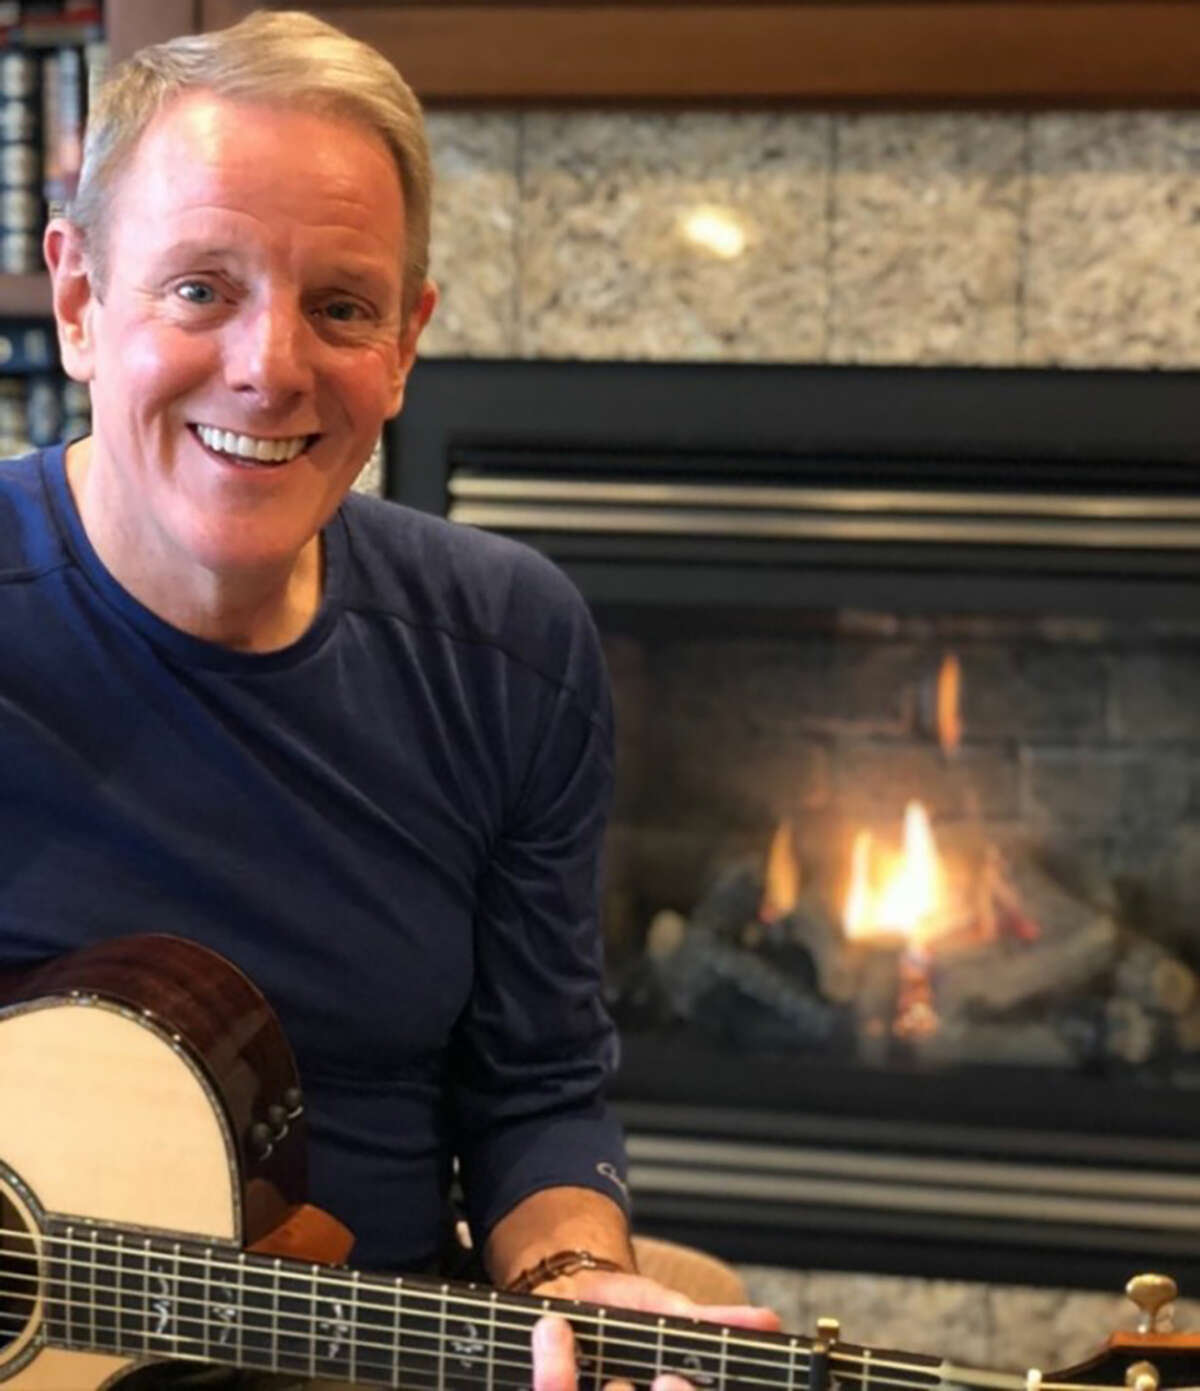 Daniel Terry, A financial advisor Edward Jones in Big Rapids, performs songs from his first CD album “At Sandy’s Restaurant” at 7 p.m Friday, Feb. 11, at Immanuel Lutheran Church as part of the 2022 Festival of the Arts. 